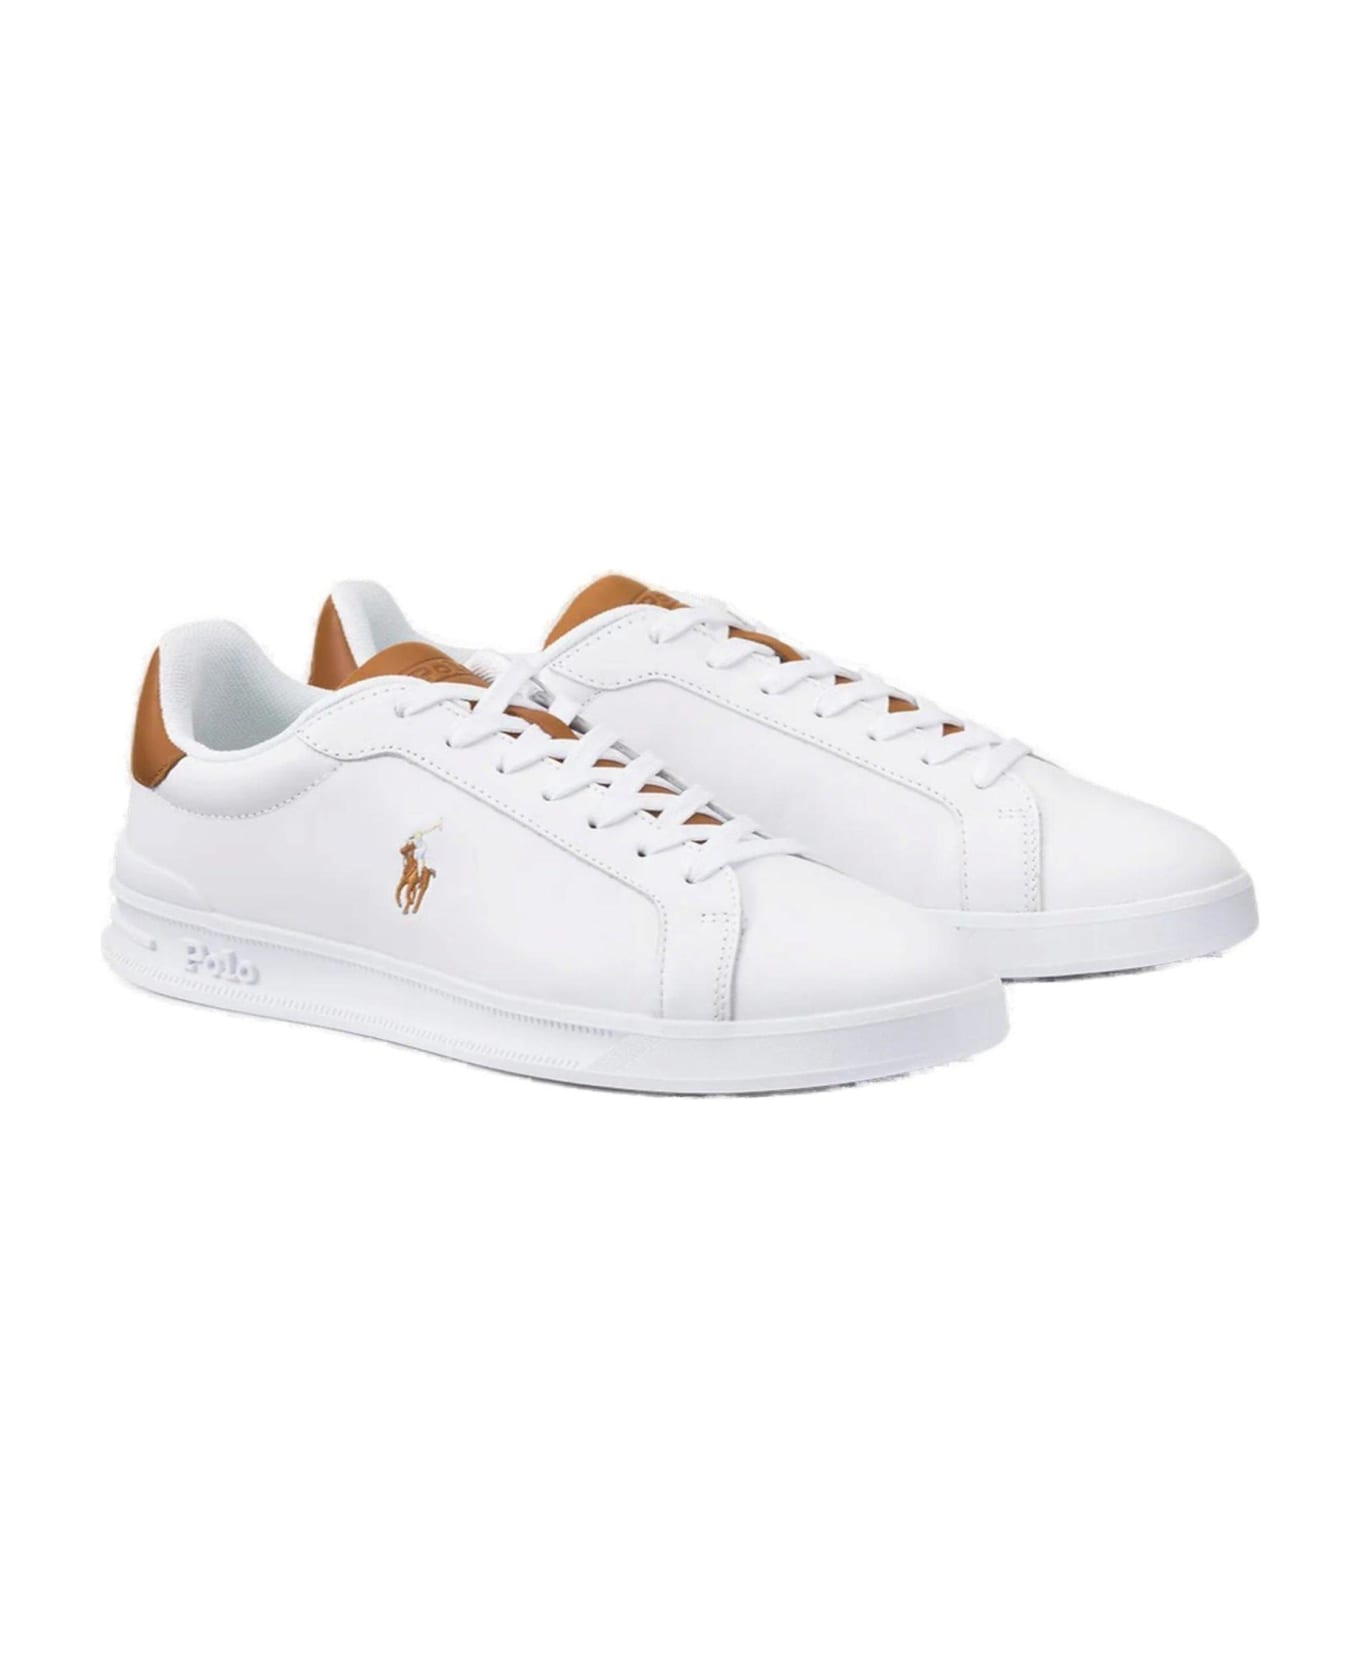 Polo Ralph Lauren Logo Embroidered Low-top Sneakers - White